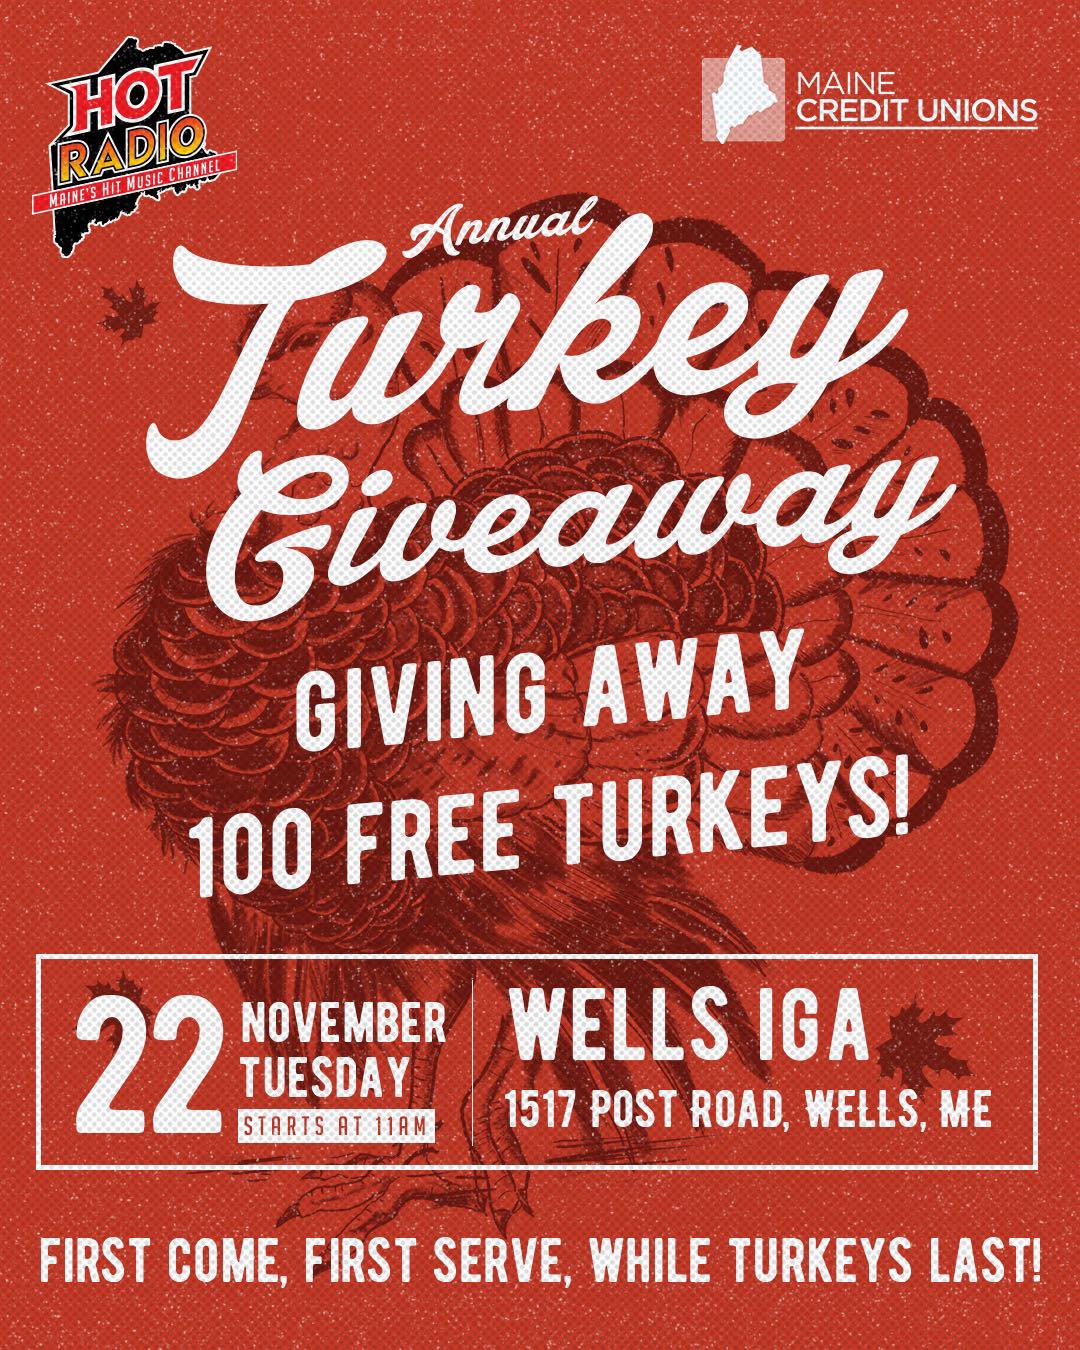 THIS Tuesday!
We're giving away over 100 FREE turkeys for Thanksgiving. 

Prices of everything are up this year. Let us help you for Thanksgiving. NO strings attached. FREE turkeys. First come first serve. 

THIS Tuesday in Wells.  11am.